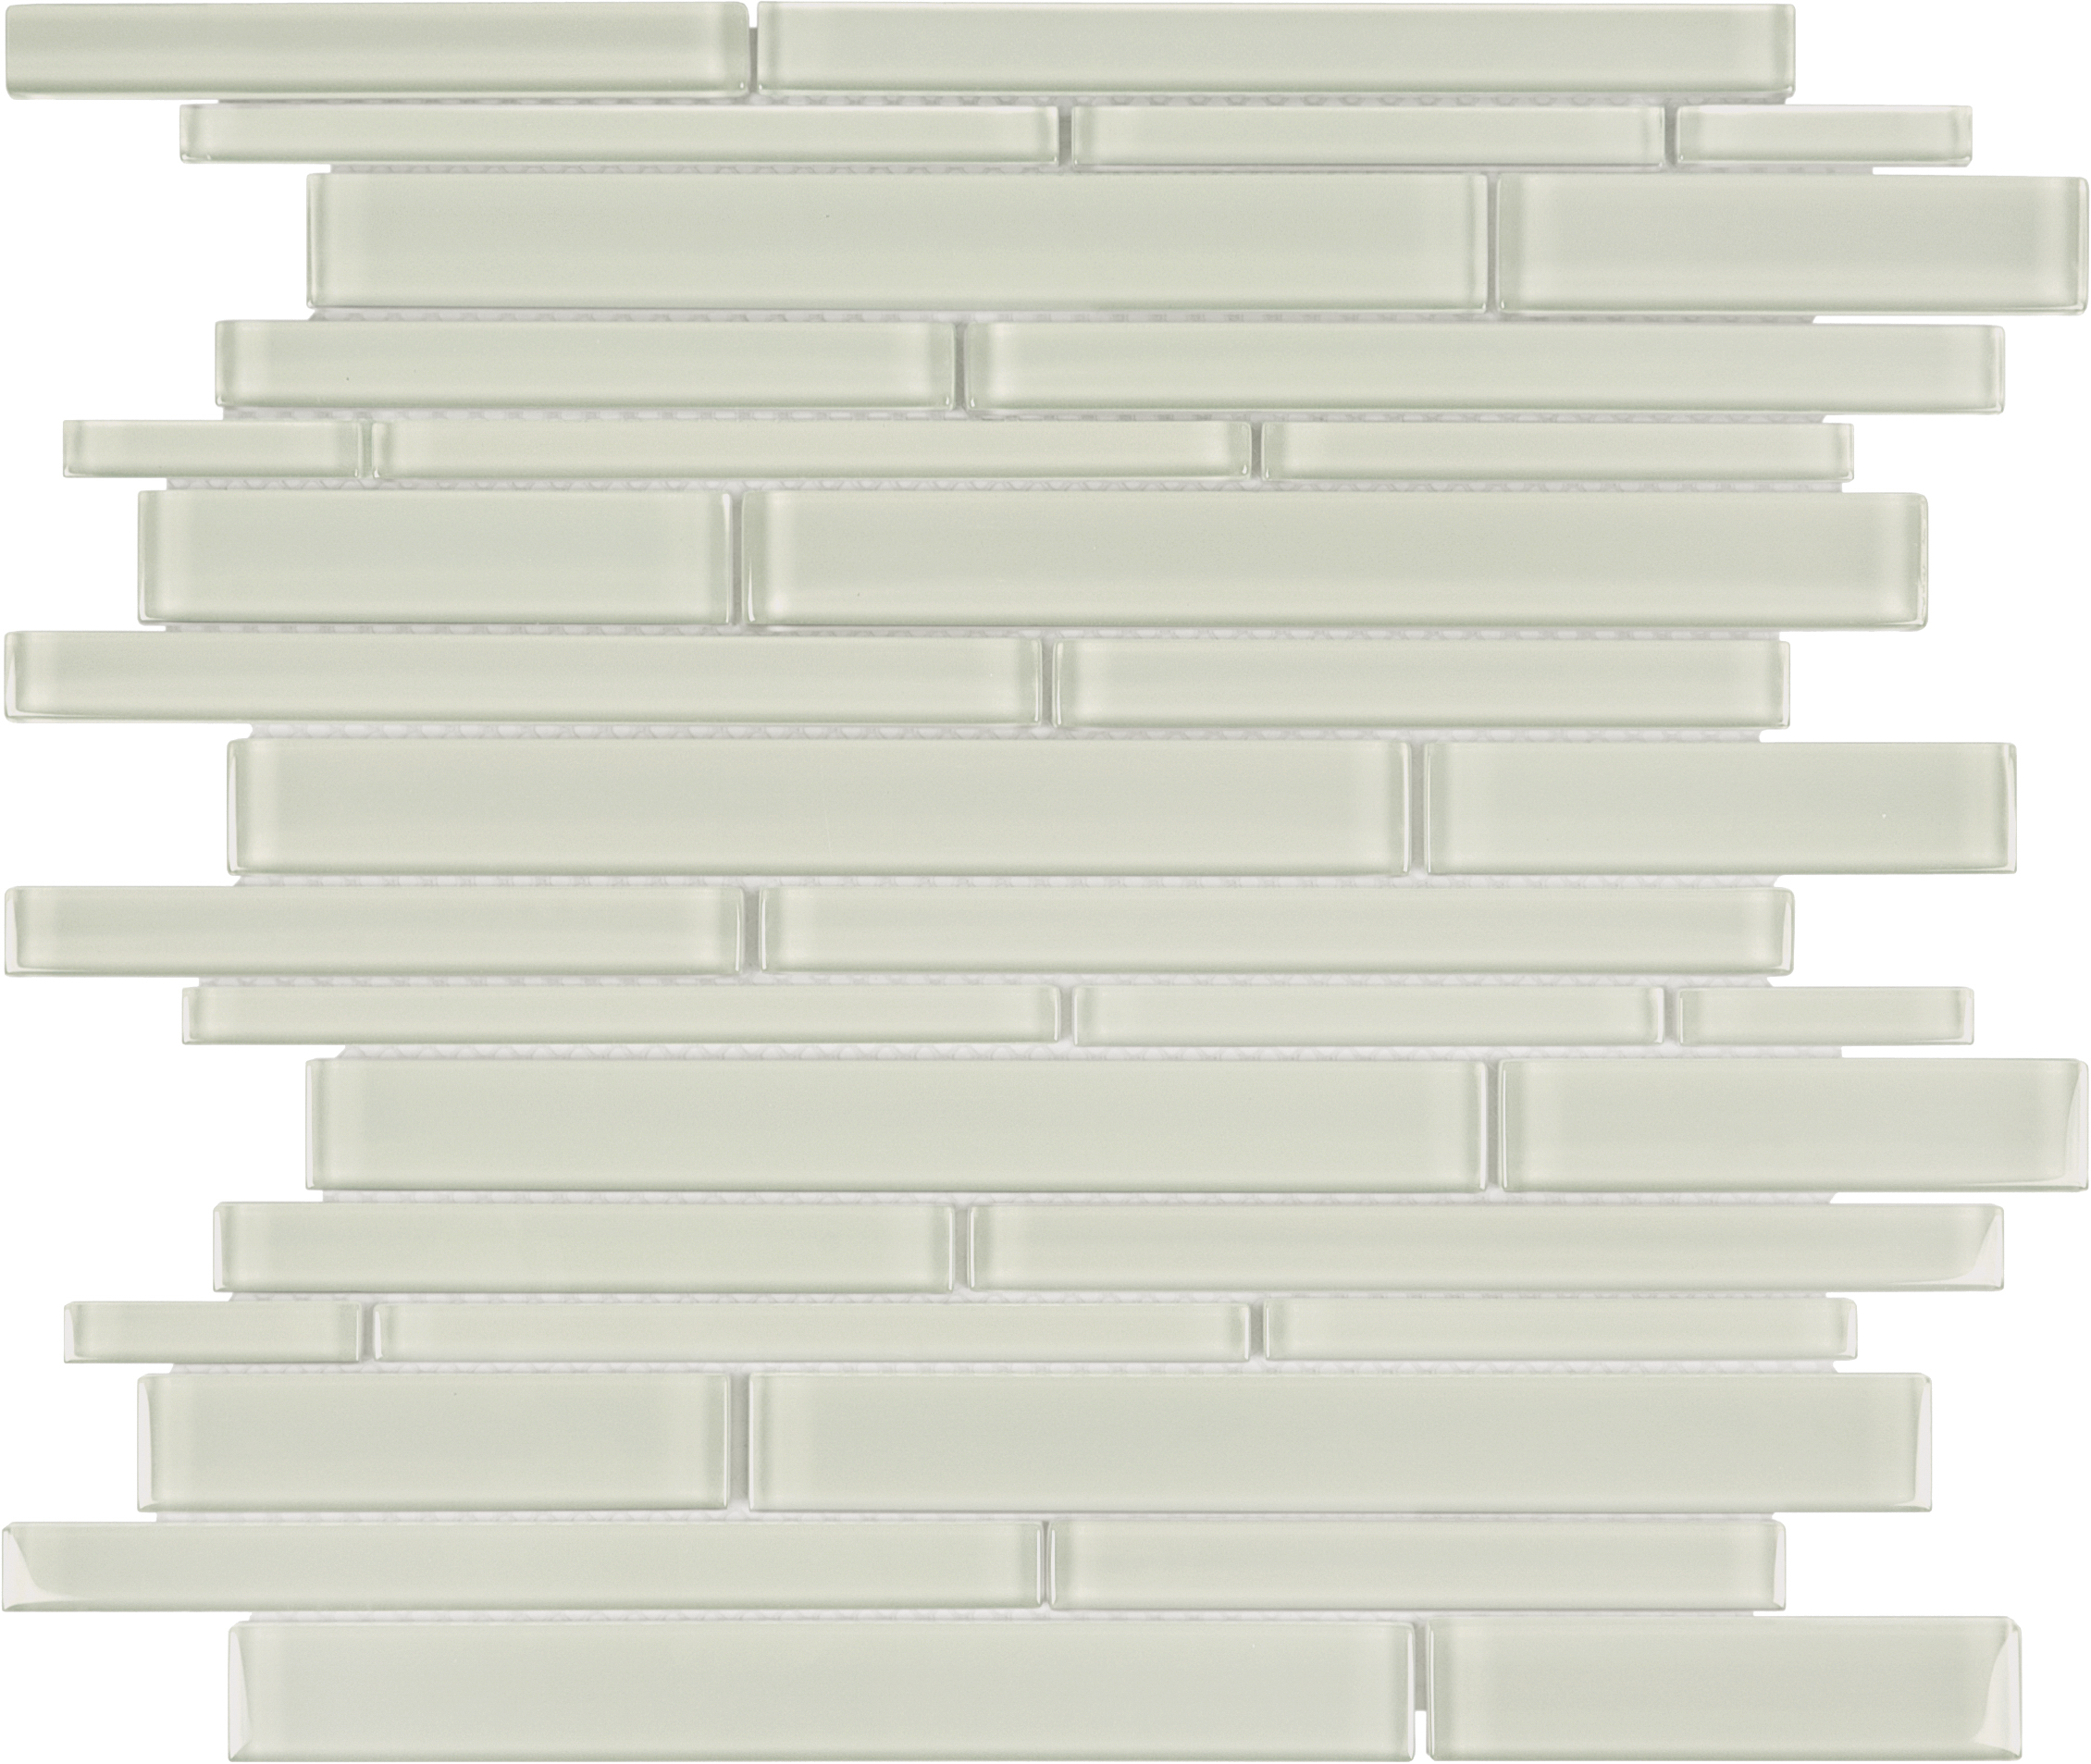 sand random strip pattern fused glass mosaic from element anatolia collection distributed by surface group international glossy finish rounded edge mesh shape